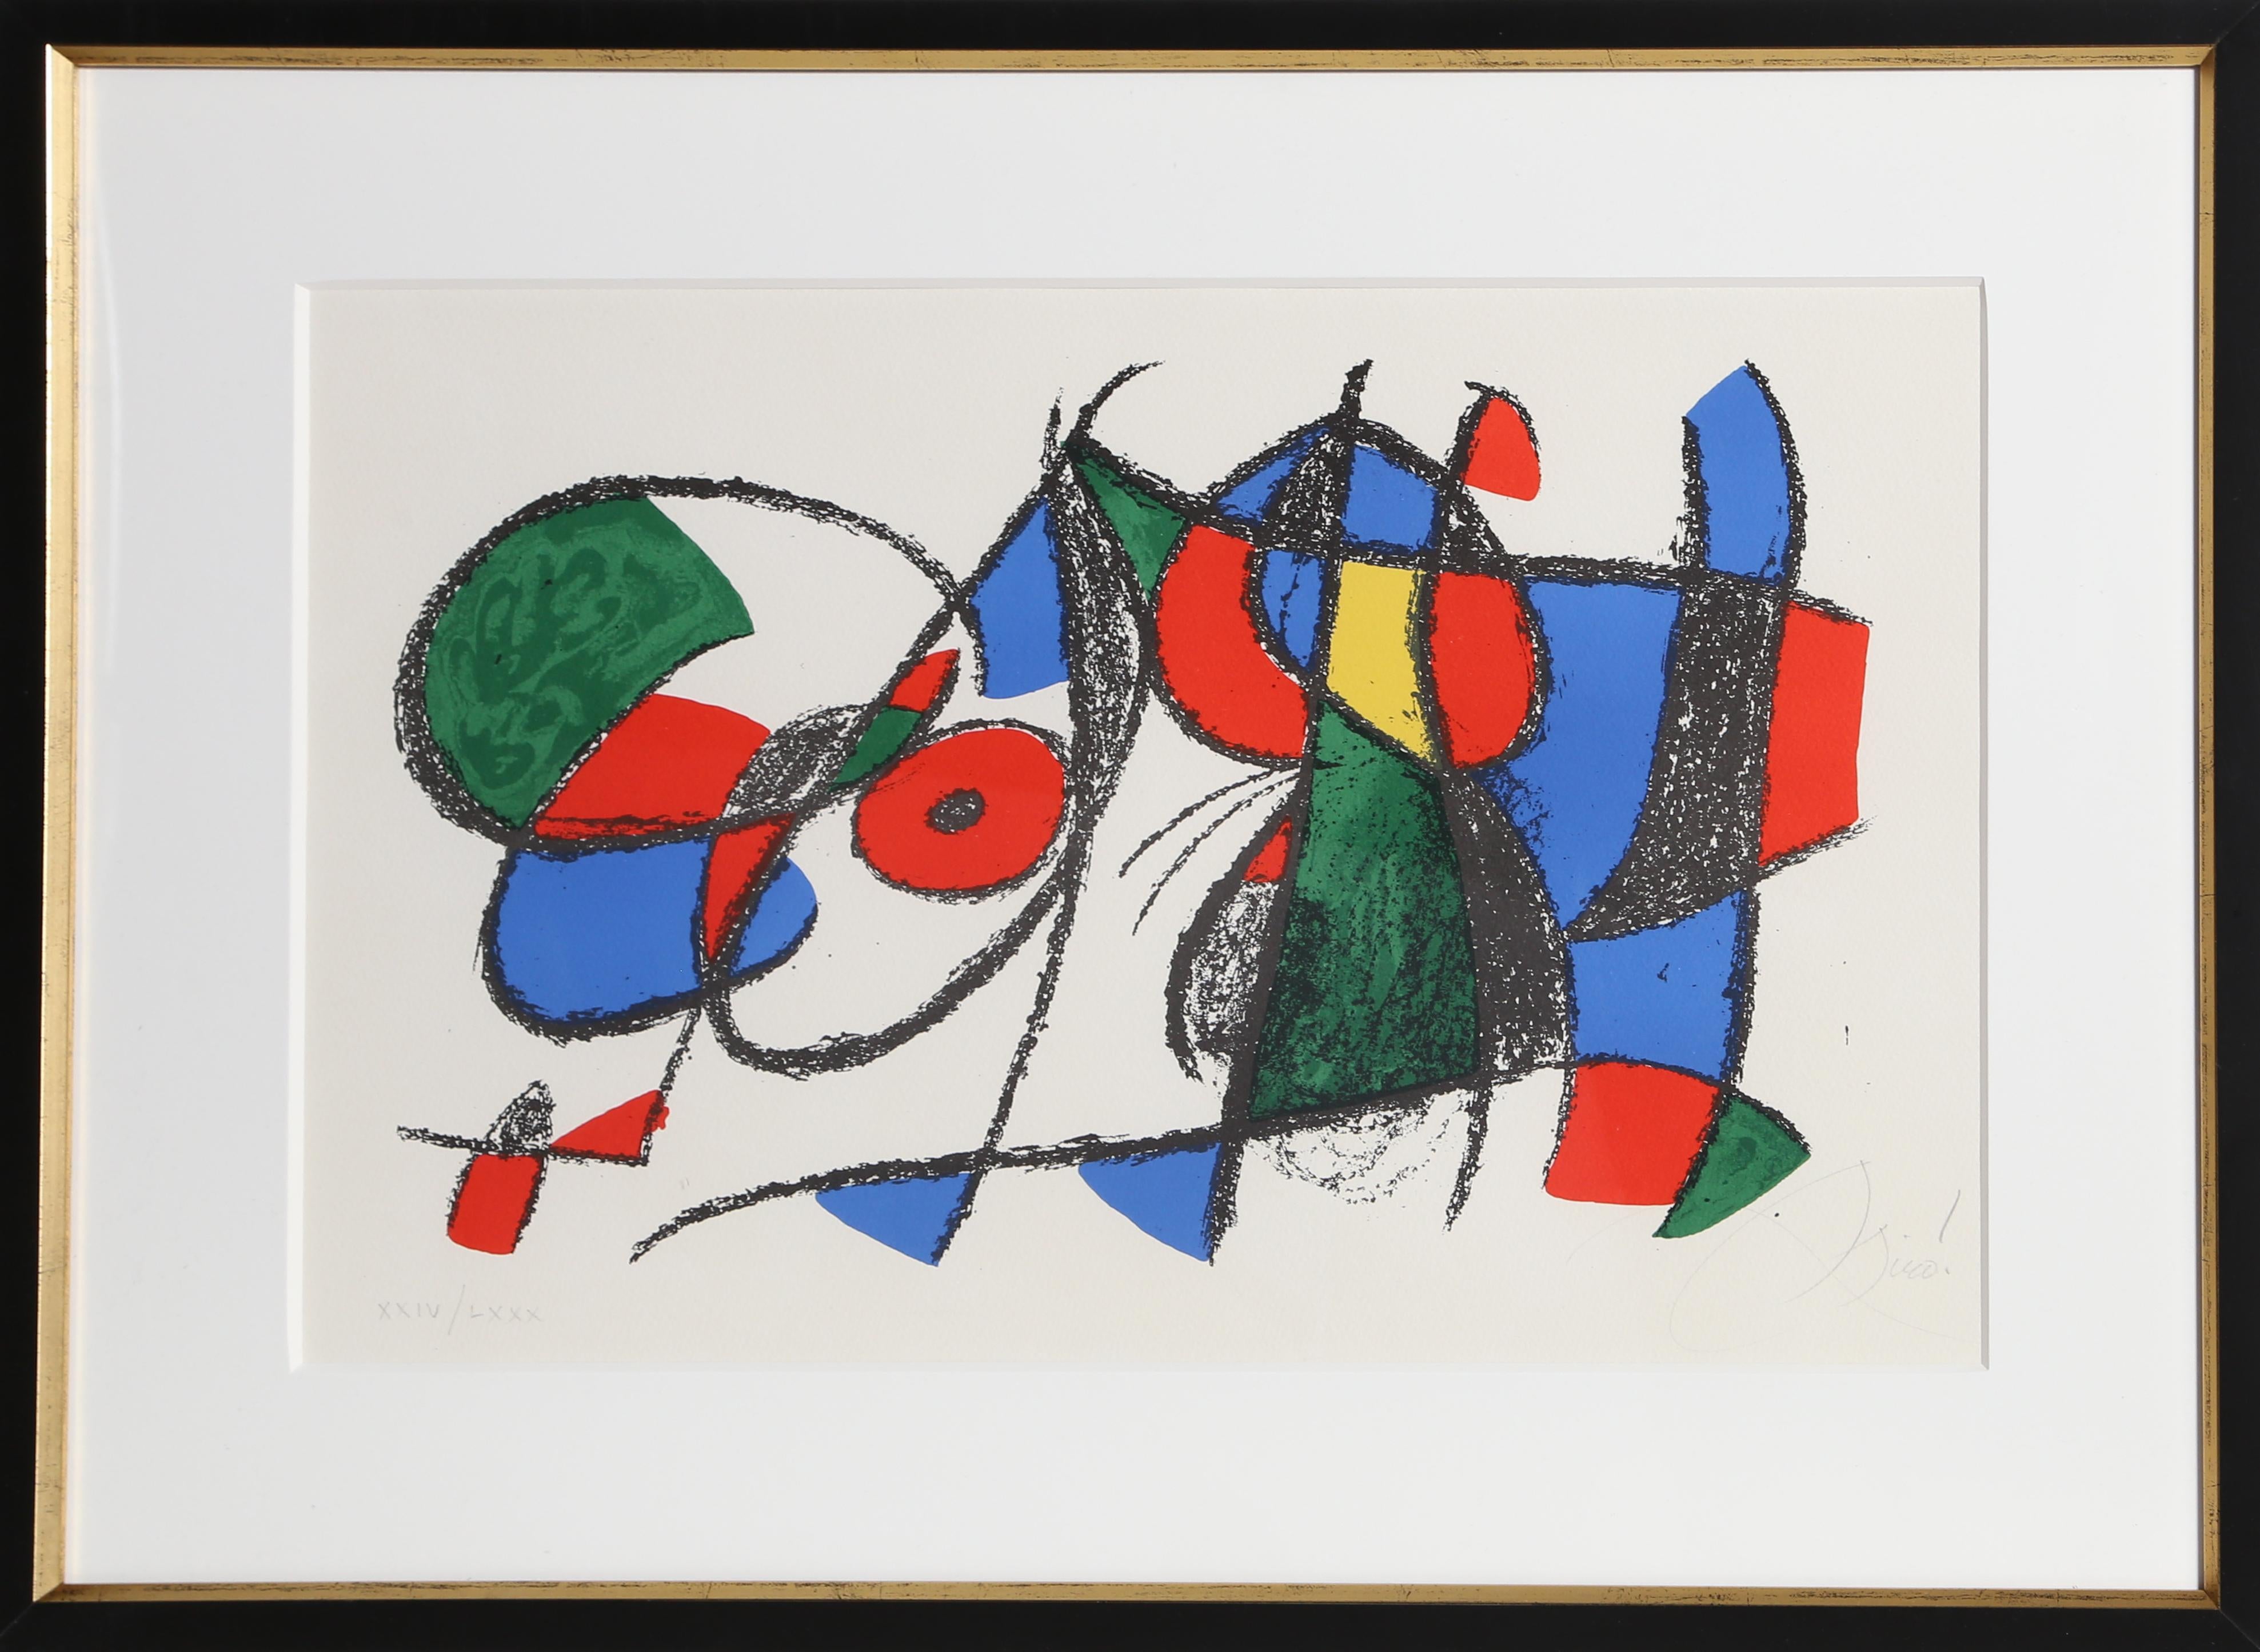 Artist:	Joan Miro, Spanish (1893 - 1983)
Title:	Lithographs II (M. 1044)
Year:	1975
Medium: Lithograph, signed and numbered in pencil
Edition: LXXX
Paper Size: 13.5  x 21 in. (34.29  x 52.07 cm)
Frame: 21.5 x 28.75 inches

Printer: Mourlot,